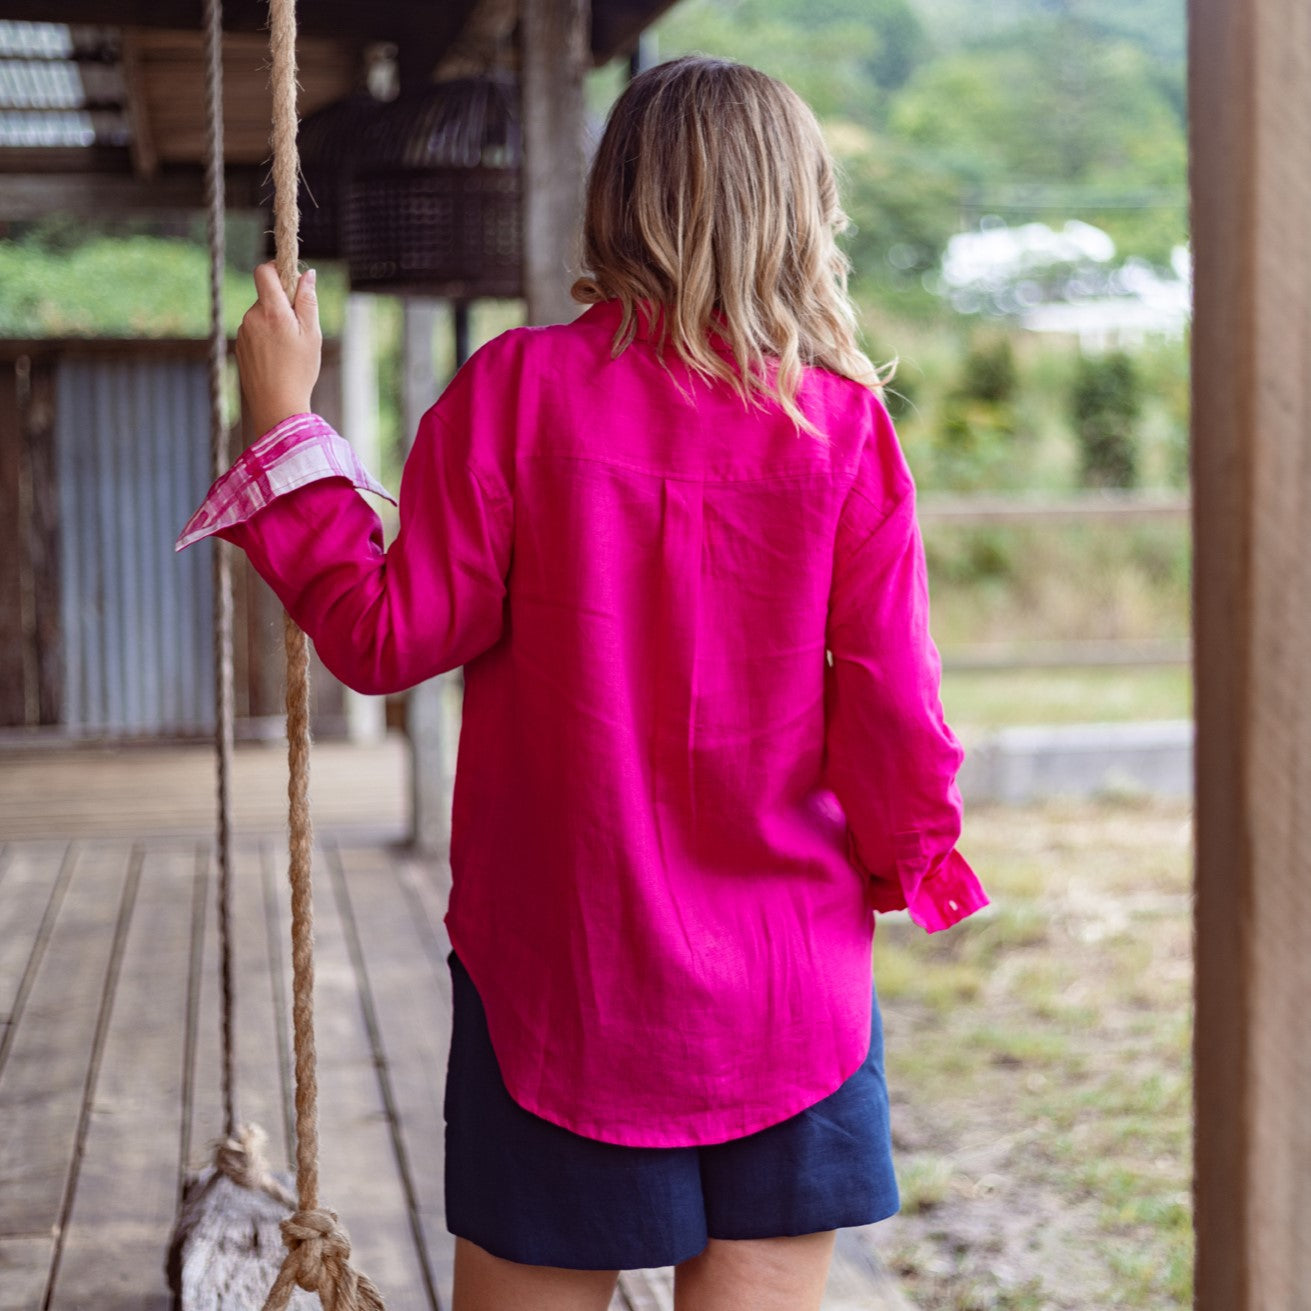 Hot Pink Organic Linen Shirt With Printed Gingham Cuffs